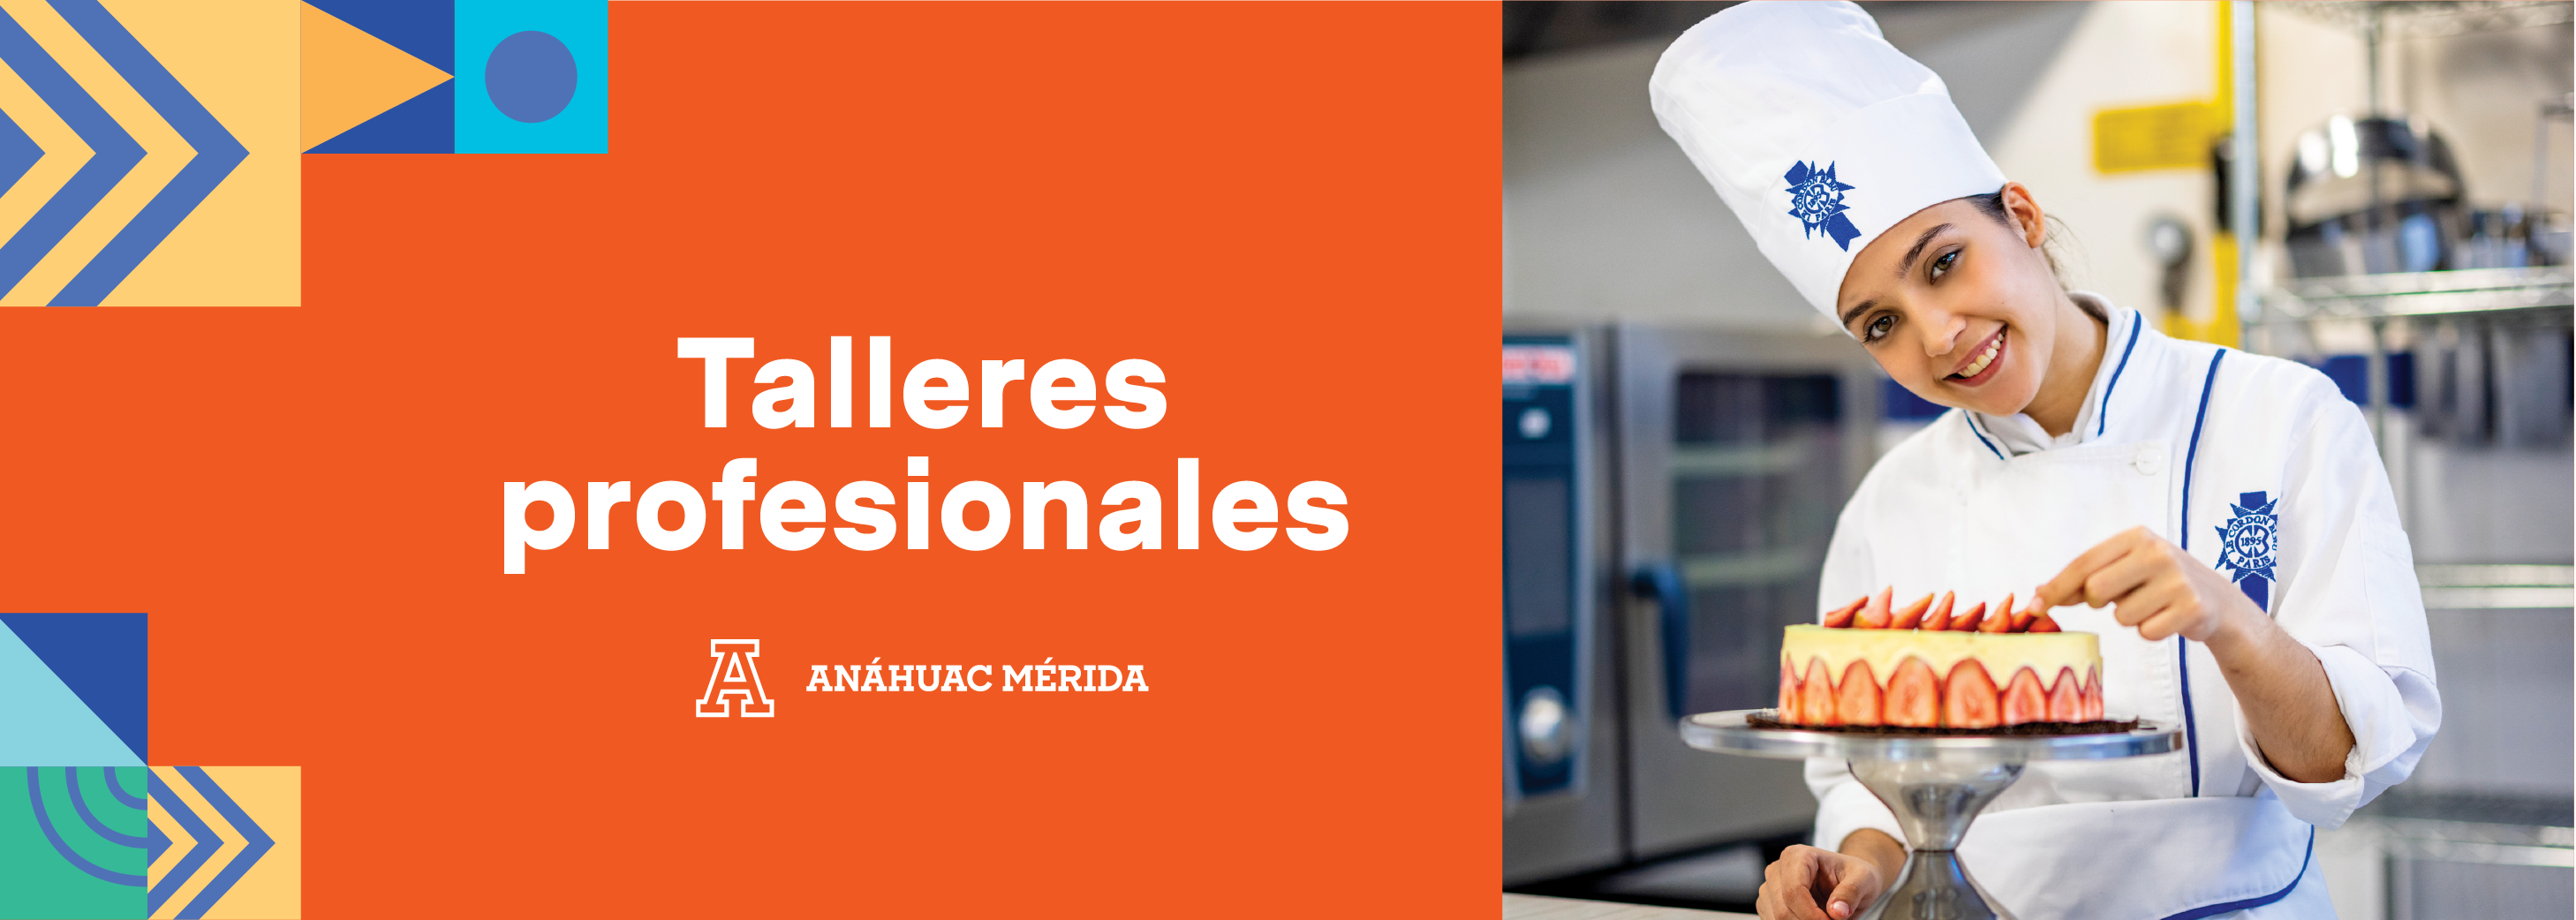 Talleres profesionales